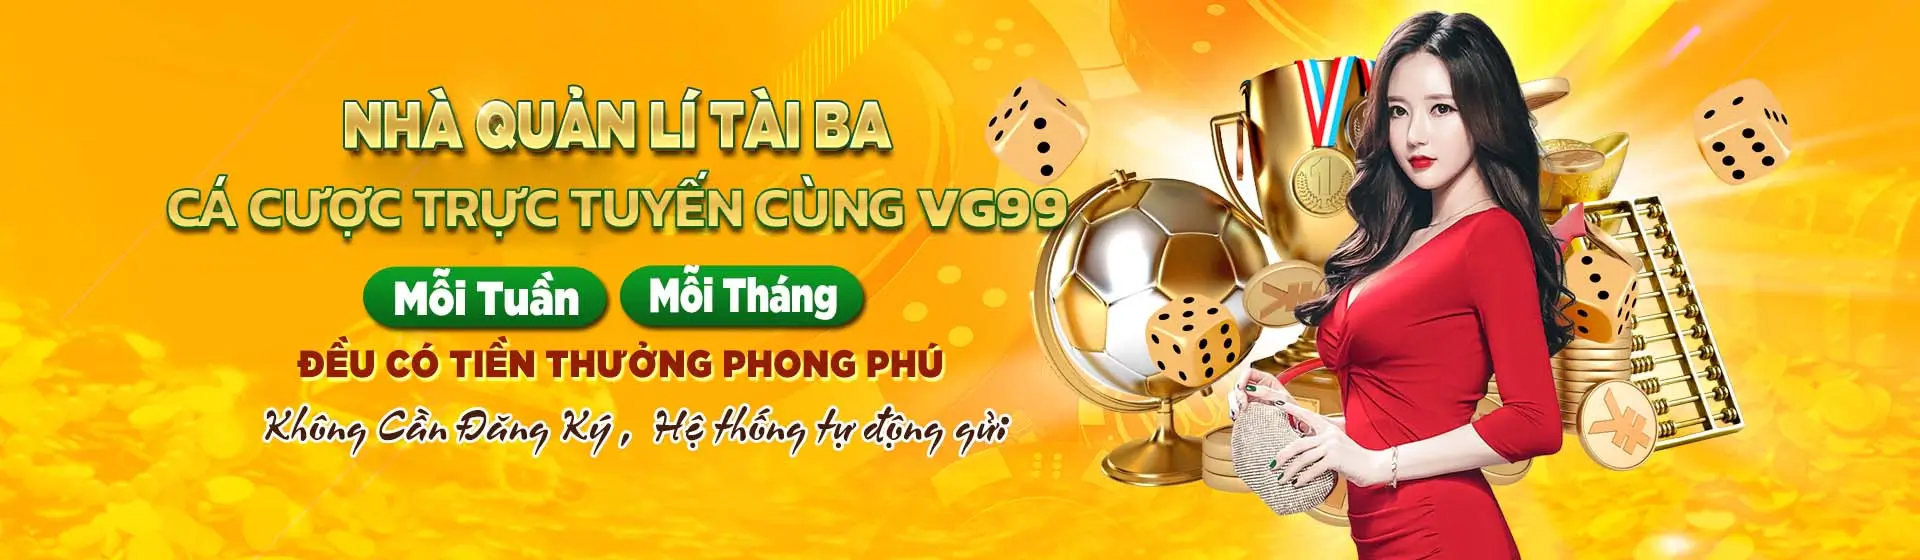 vg99-banner-the-thao